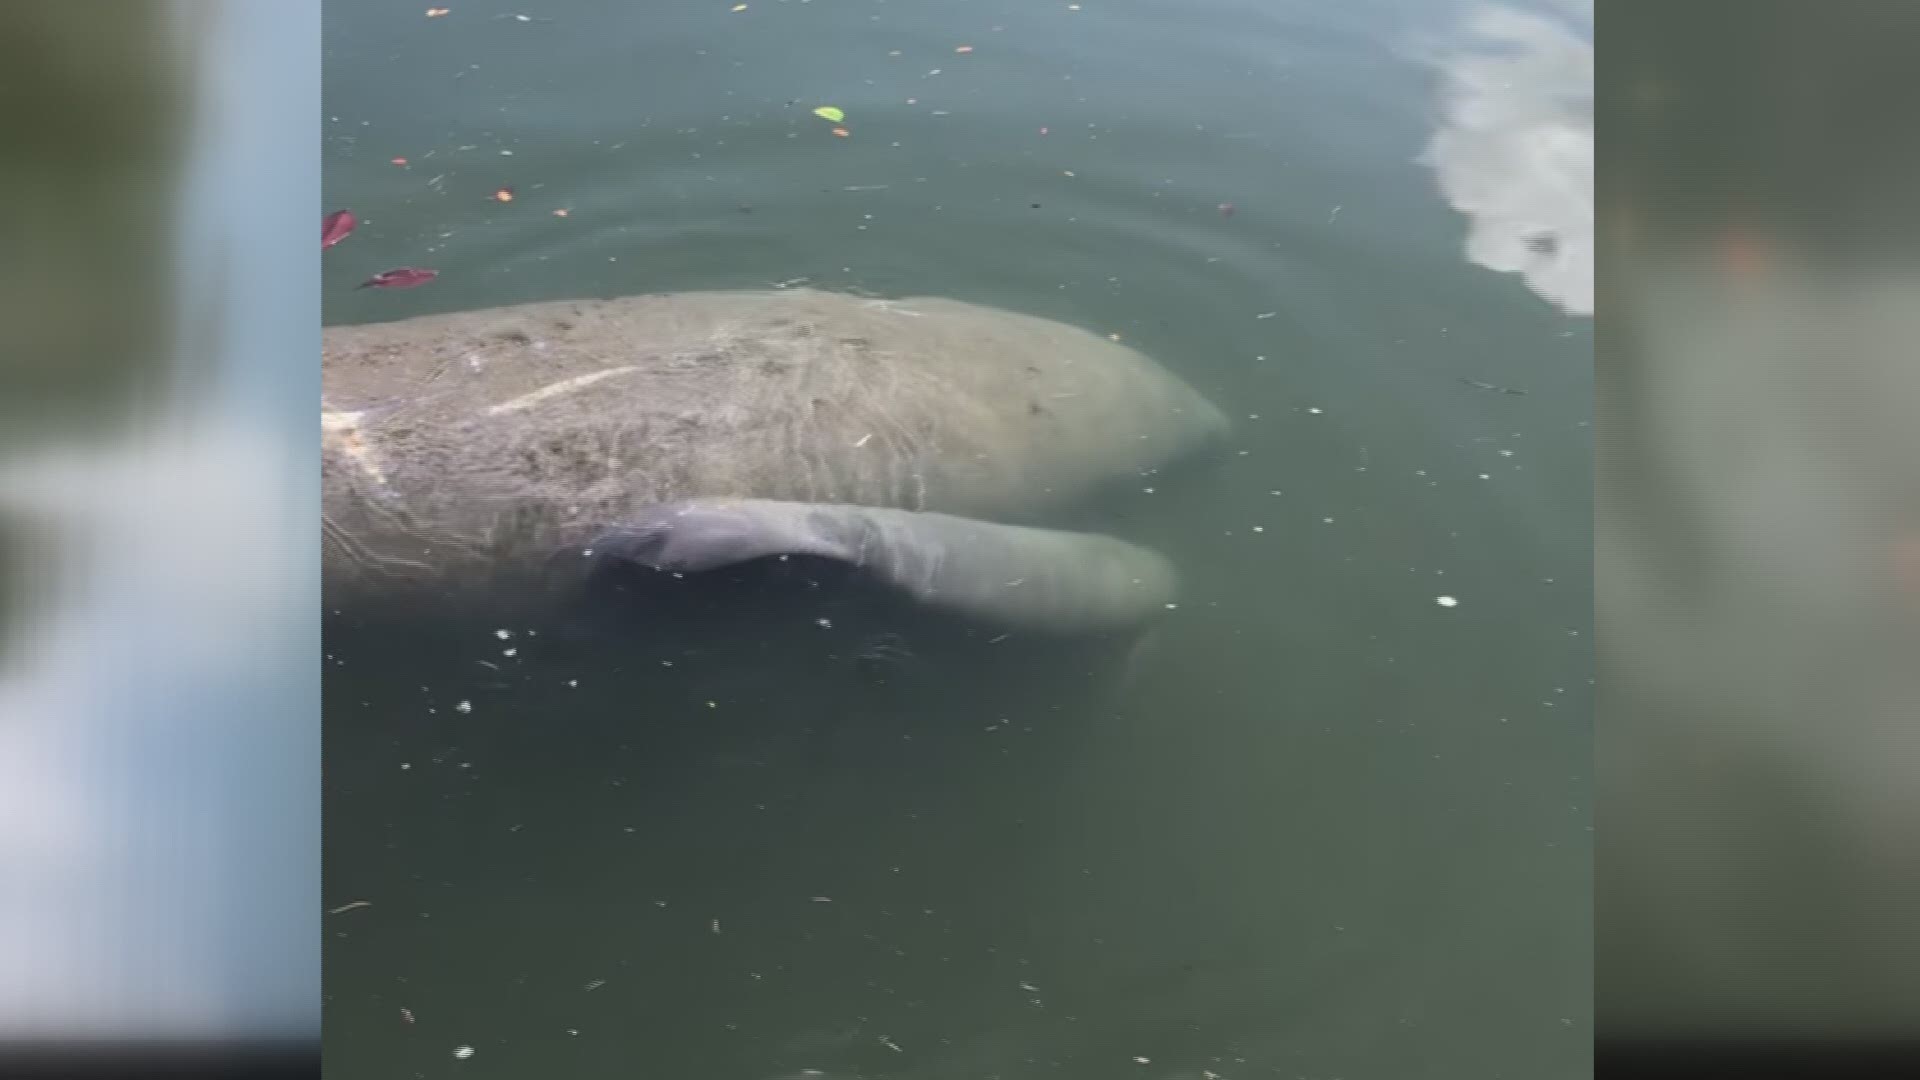 Cindy Burnett was at home in Siesta Harbor when a manatee in distress caught her attention-- turns out it was giving birth.